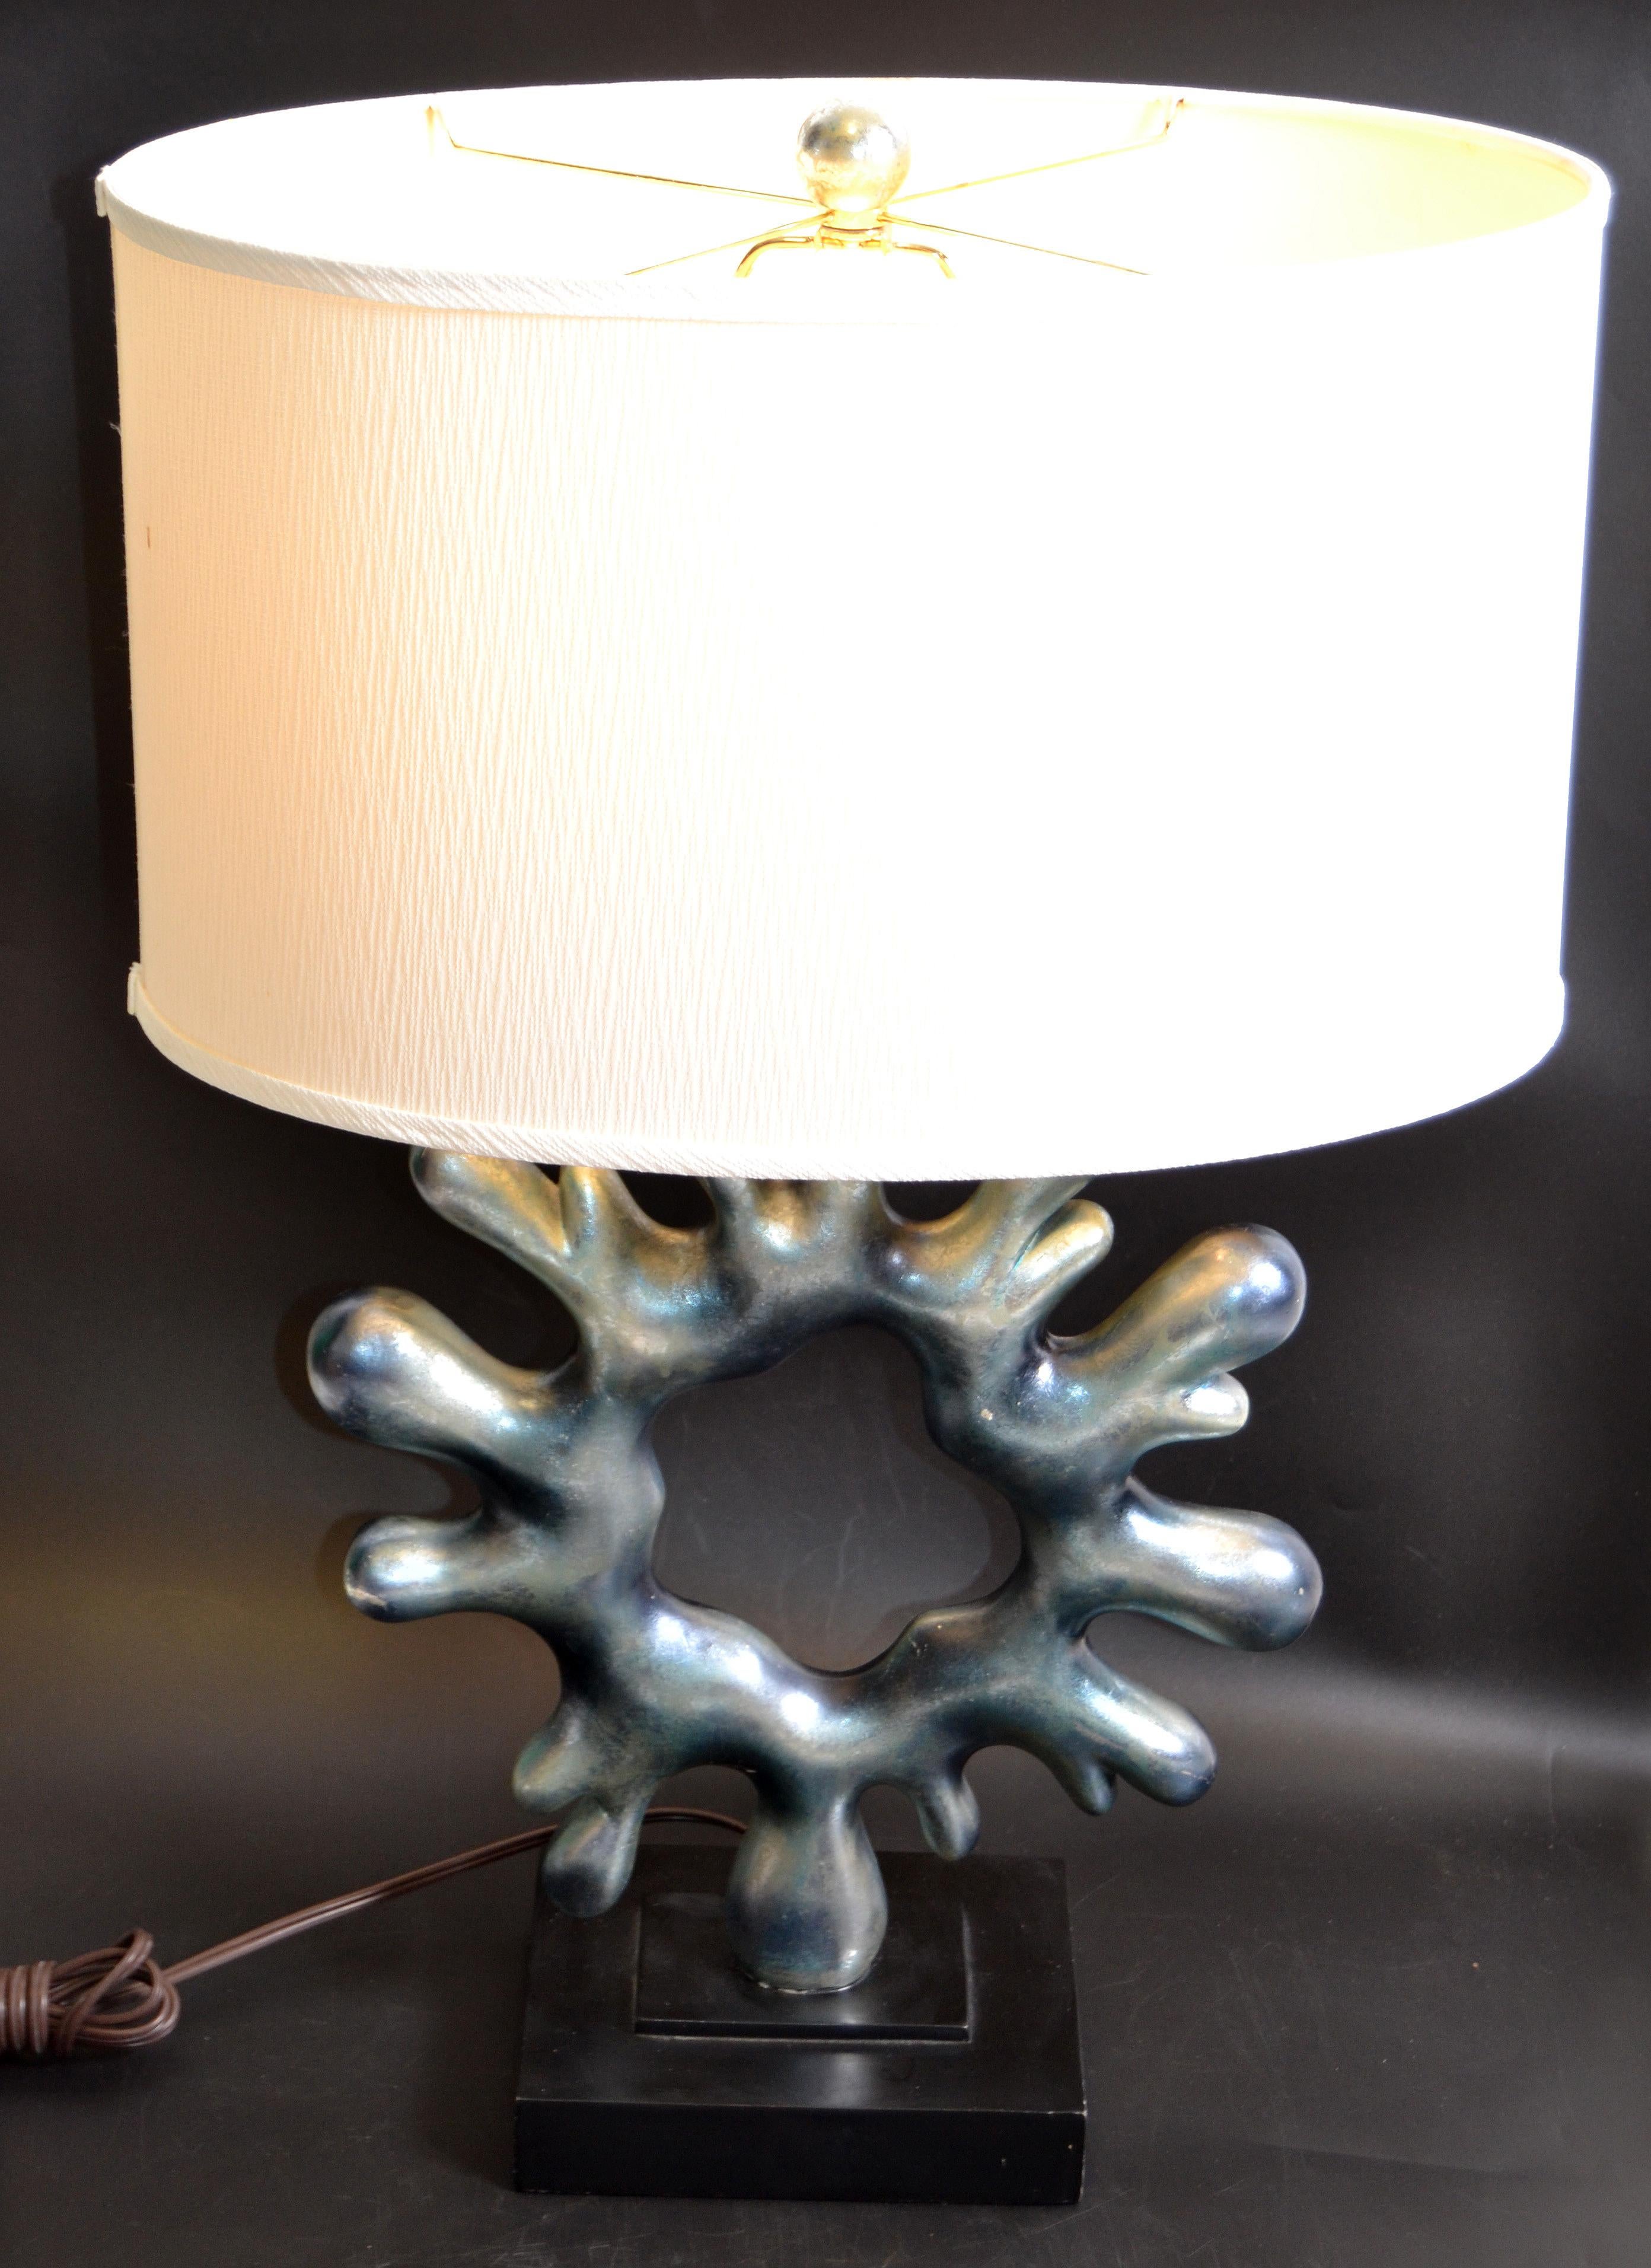 Mid-Century Modern biomorphic shape in abstract art metallic blue resin and wood table lamp with beige oval shade.
UL Listed in perfect working condition, wired for the US and takes a regular or LED bulb.
The biomorphic shape that seems to move as